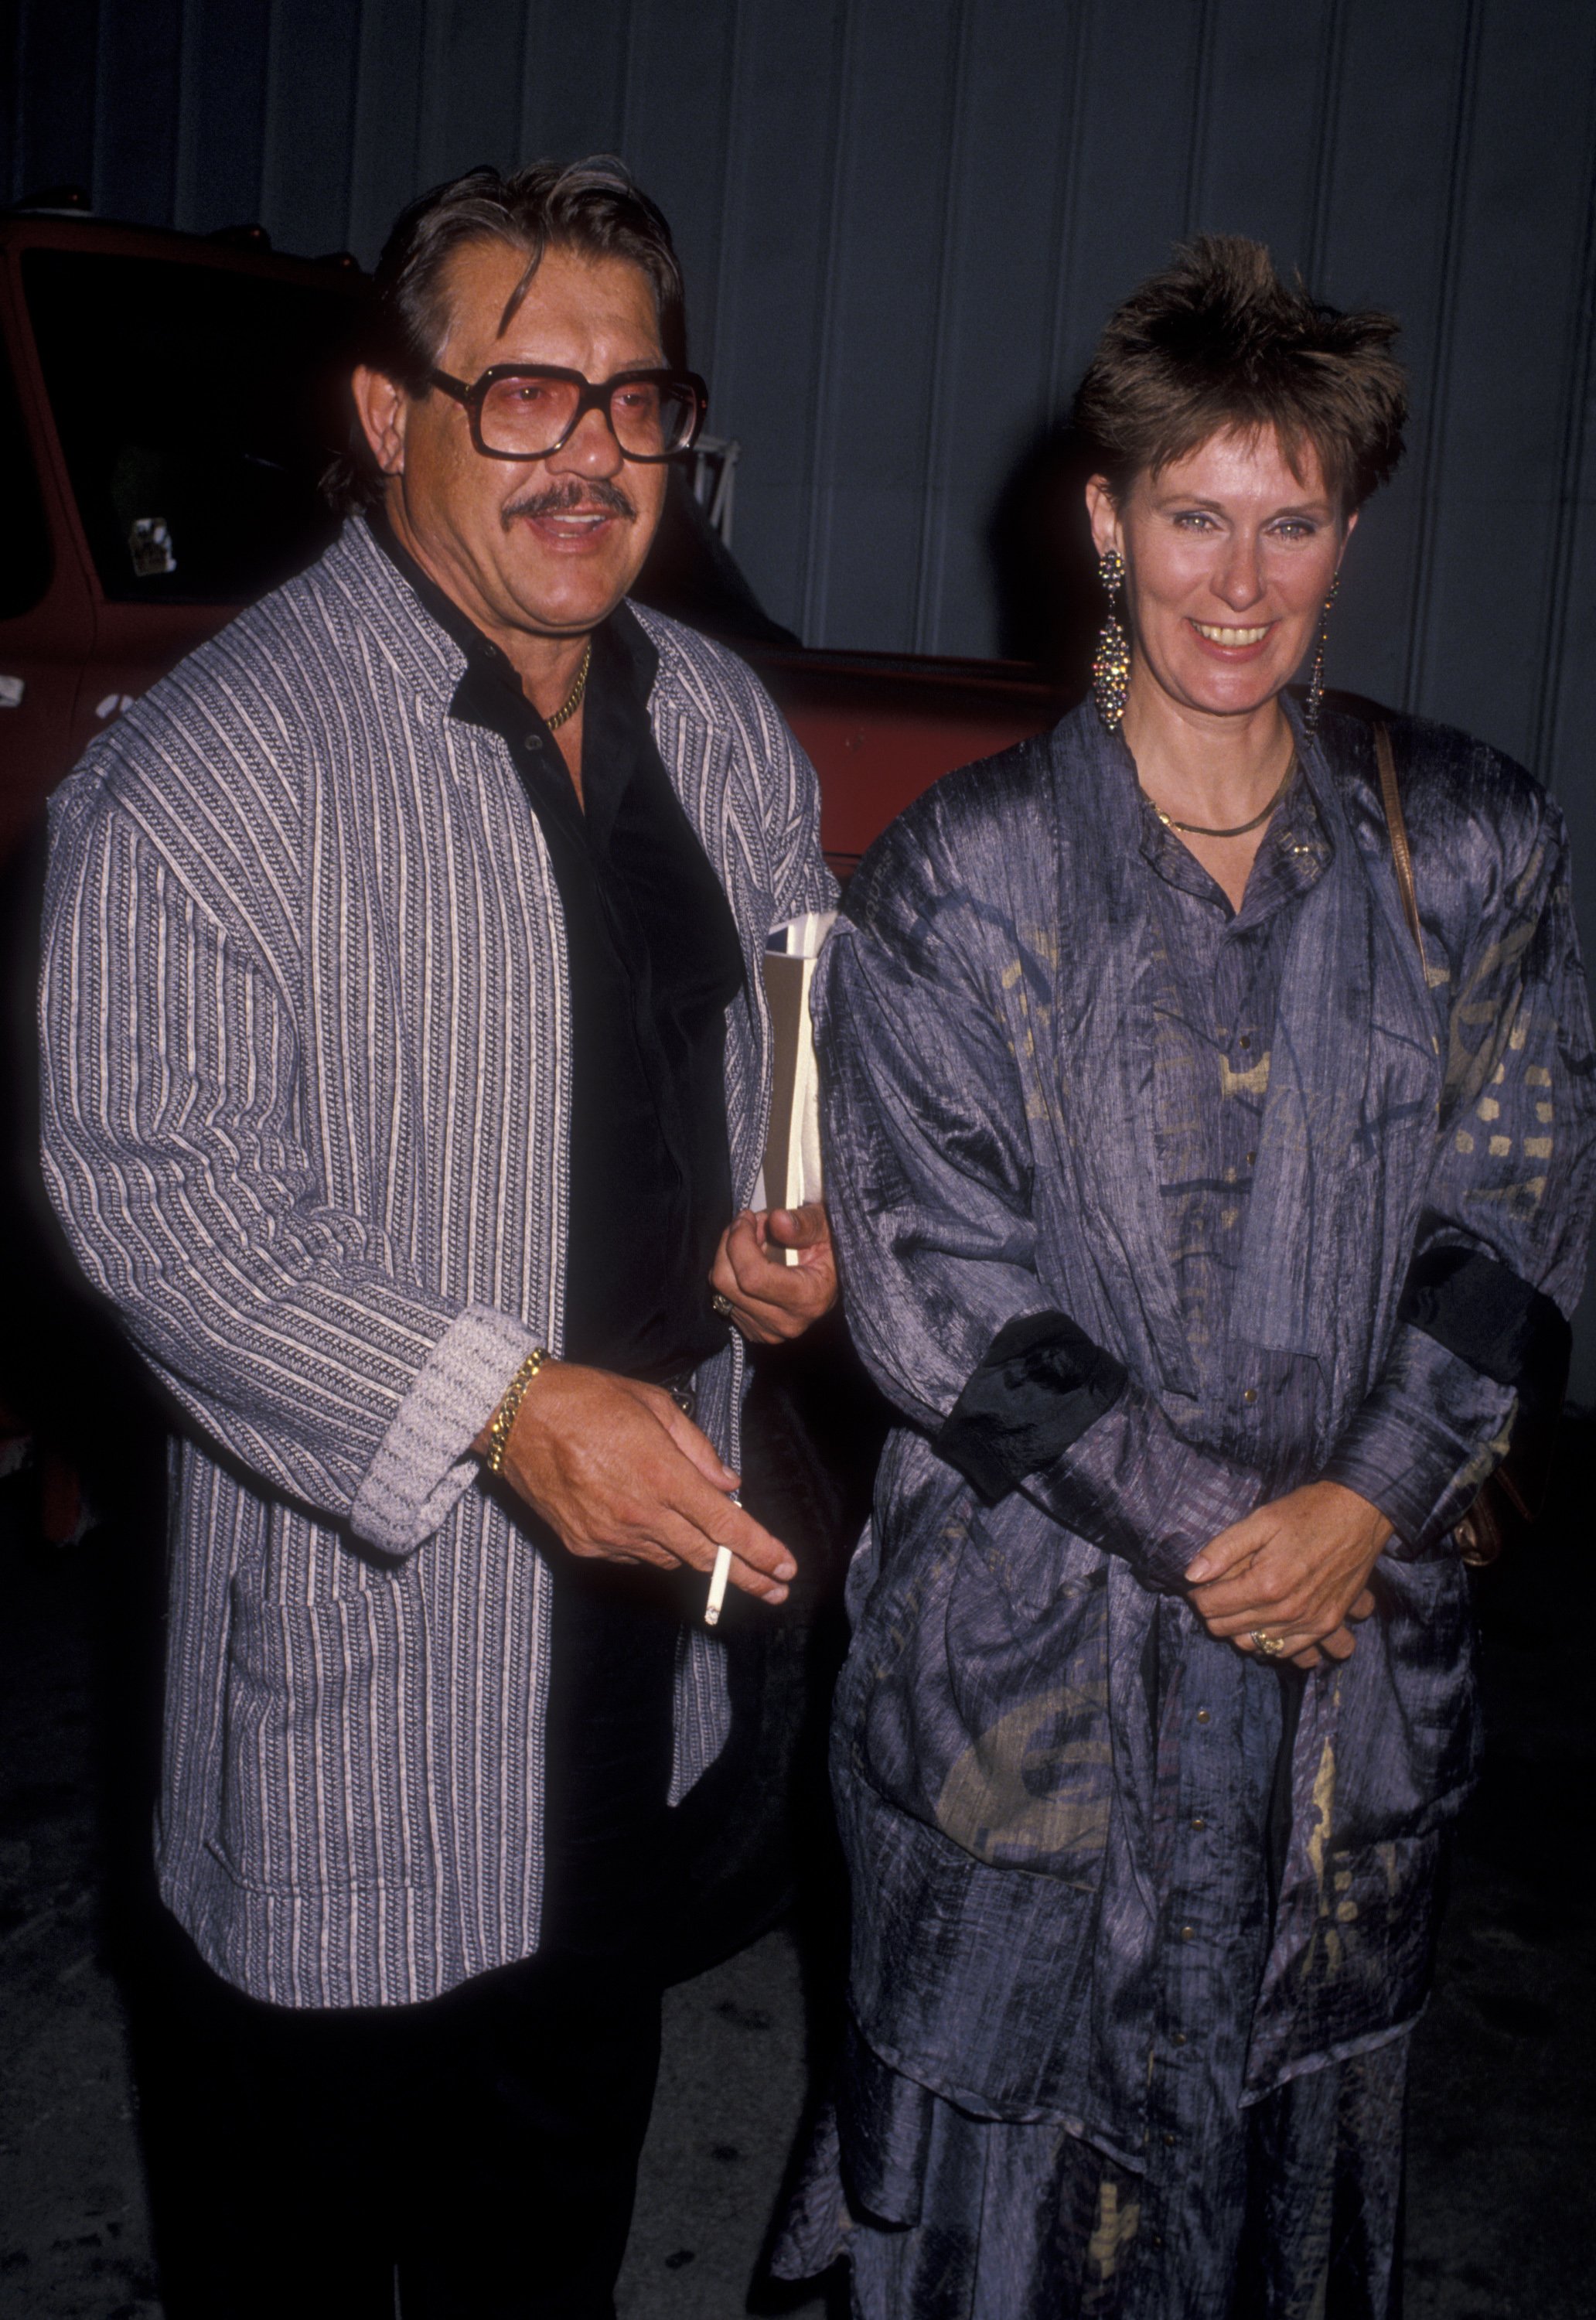 Actor Alex Karras and actress Susan Clark attend the birthday party for Stan Sheinbaum on June 12, 1990 at the Barker Hanger at Santa Monica Airport in Santa Monica, California | Source: Getty Images